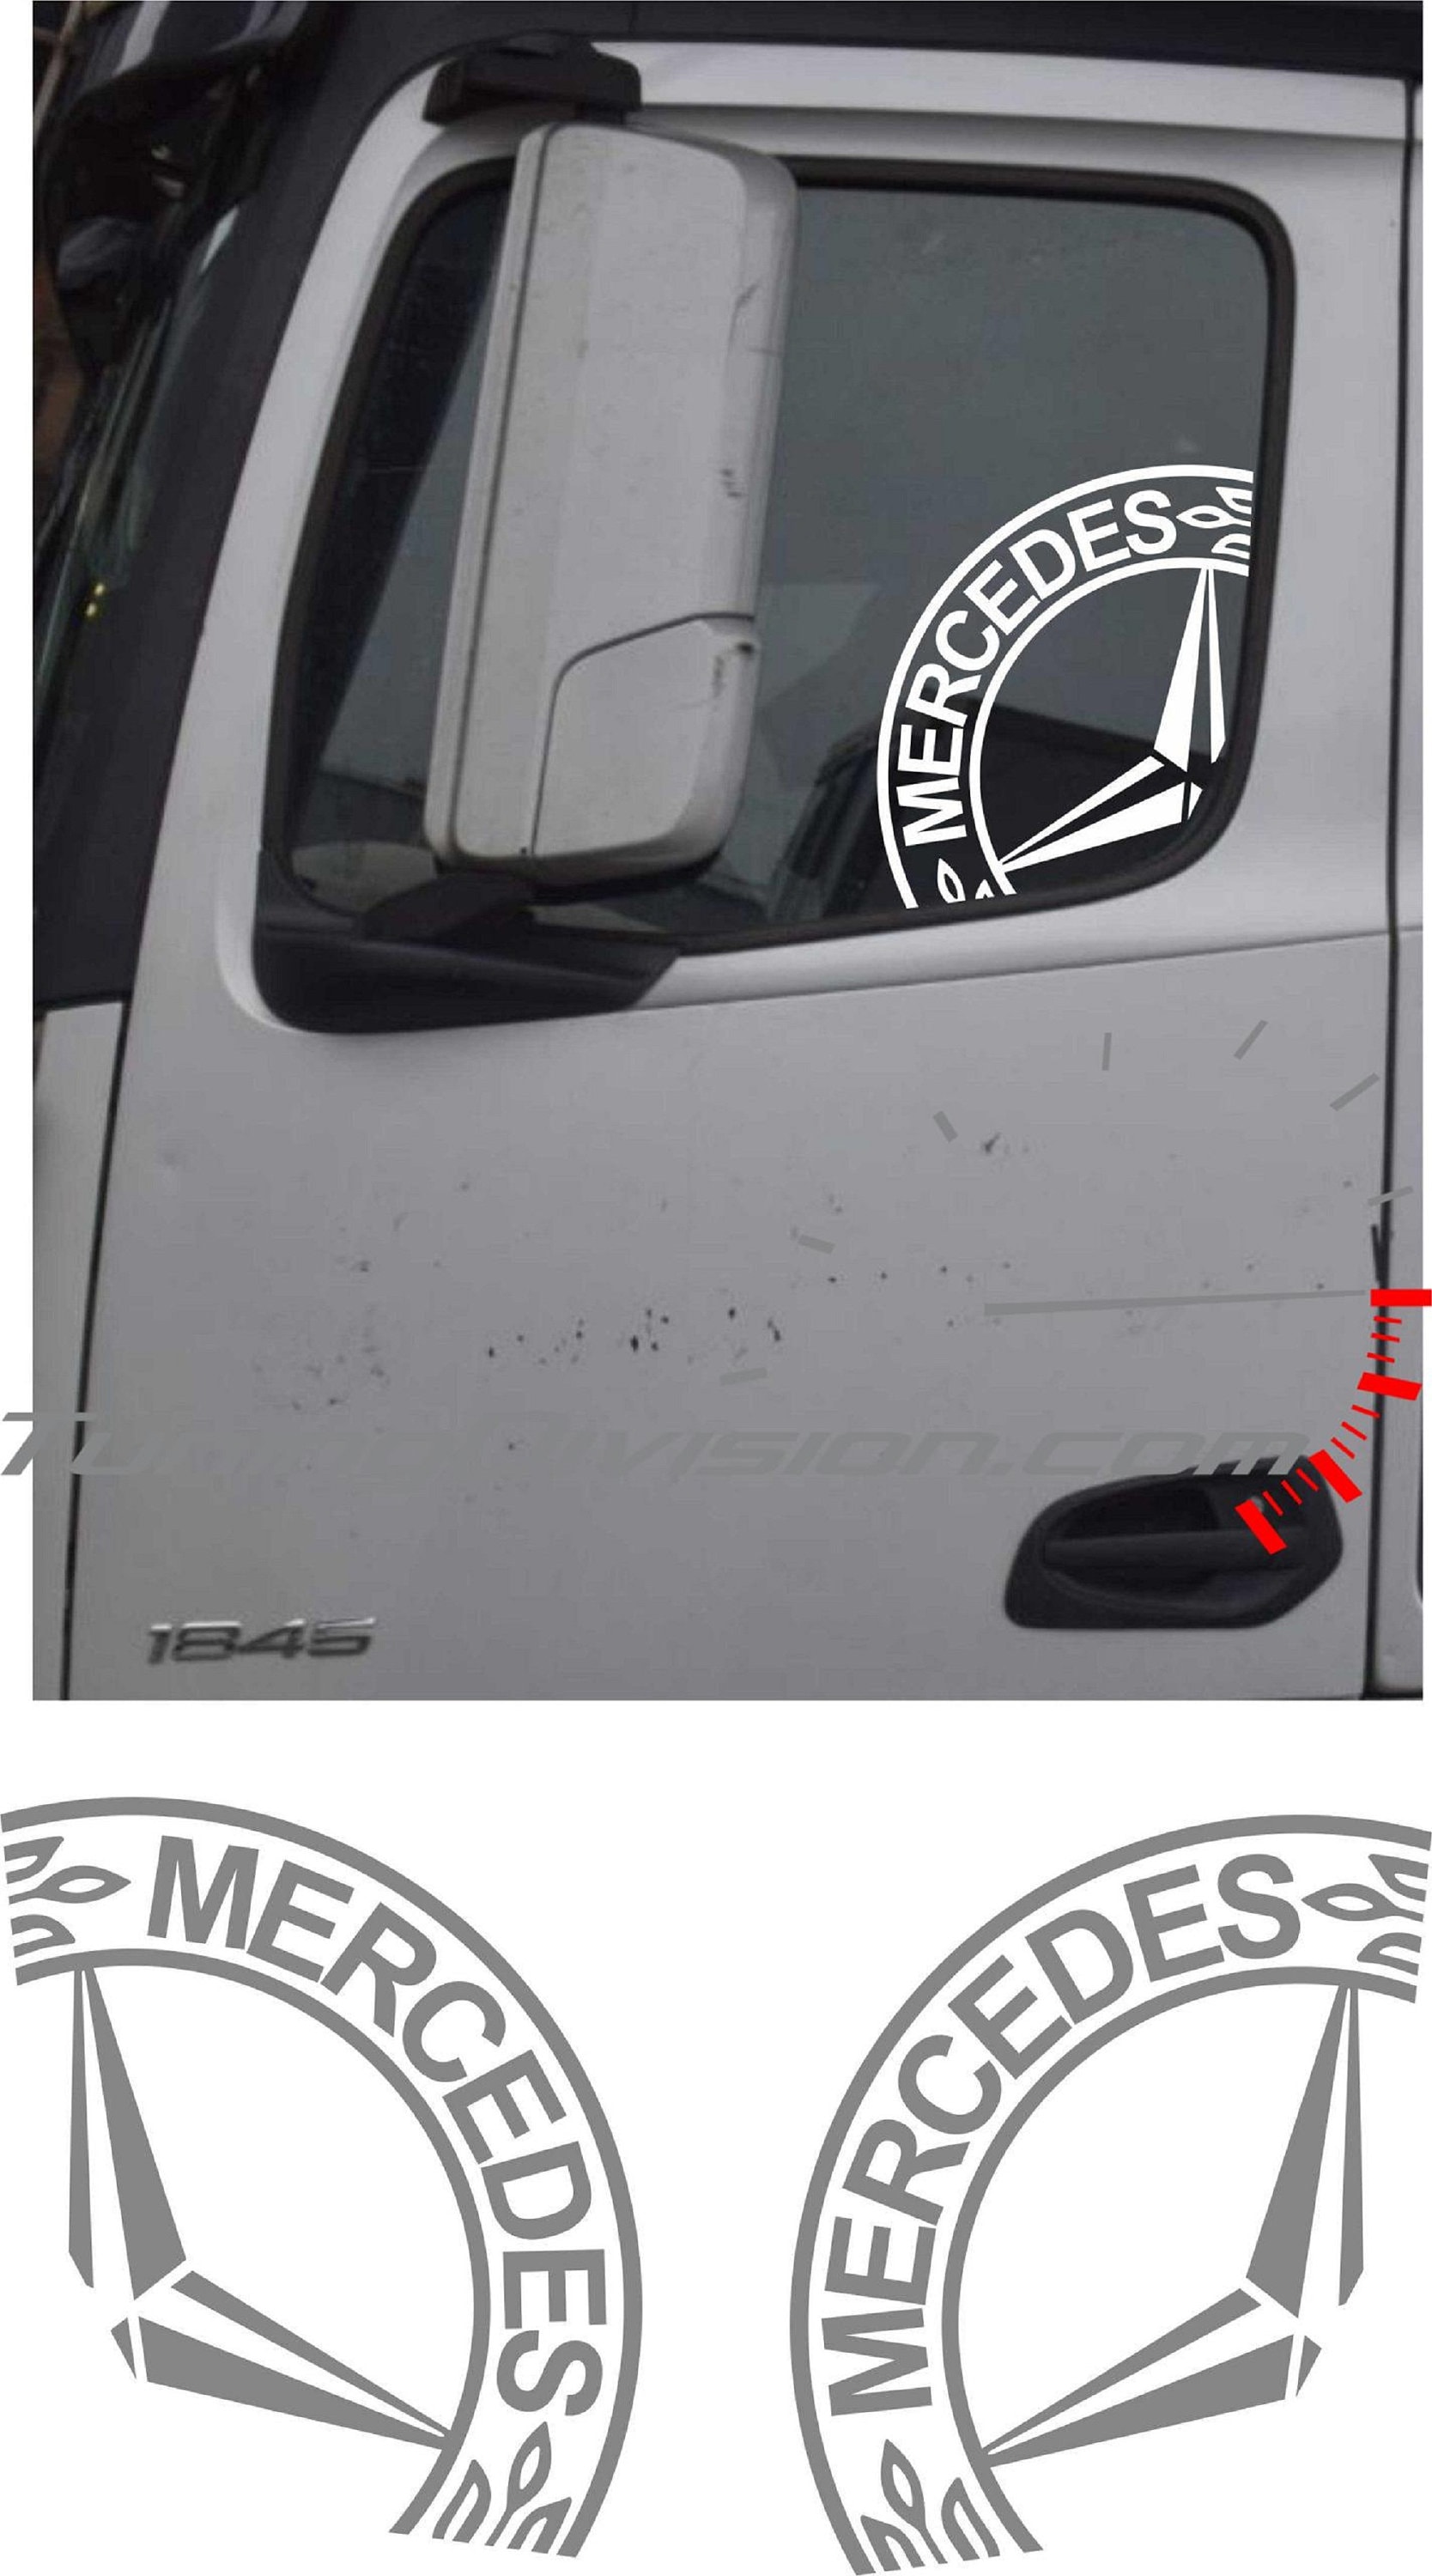 Buy Mercedes Stickers Online In India -  India